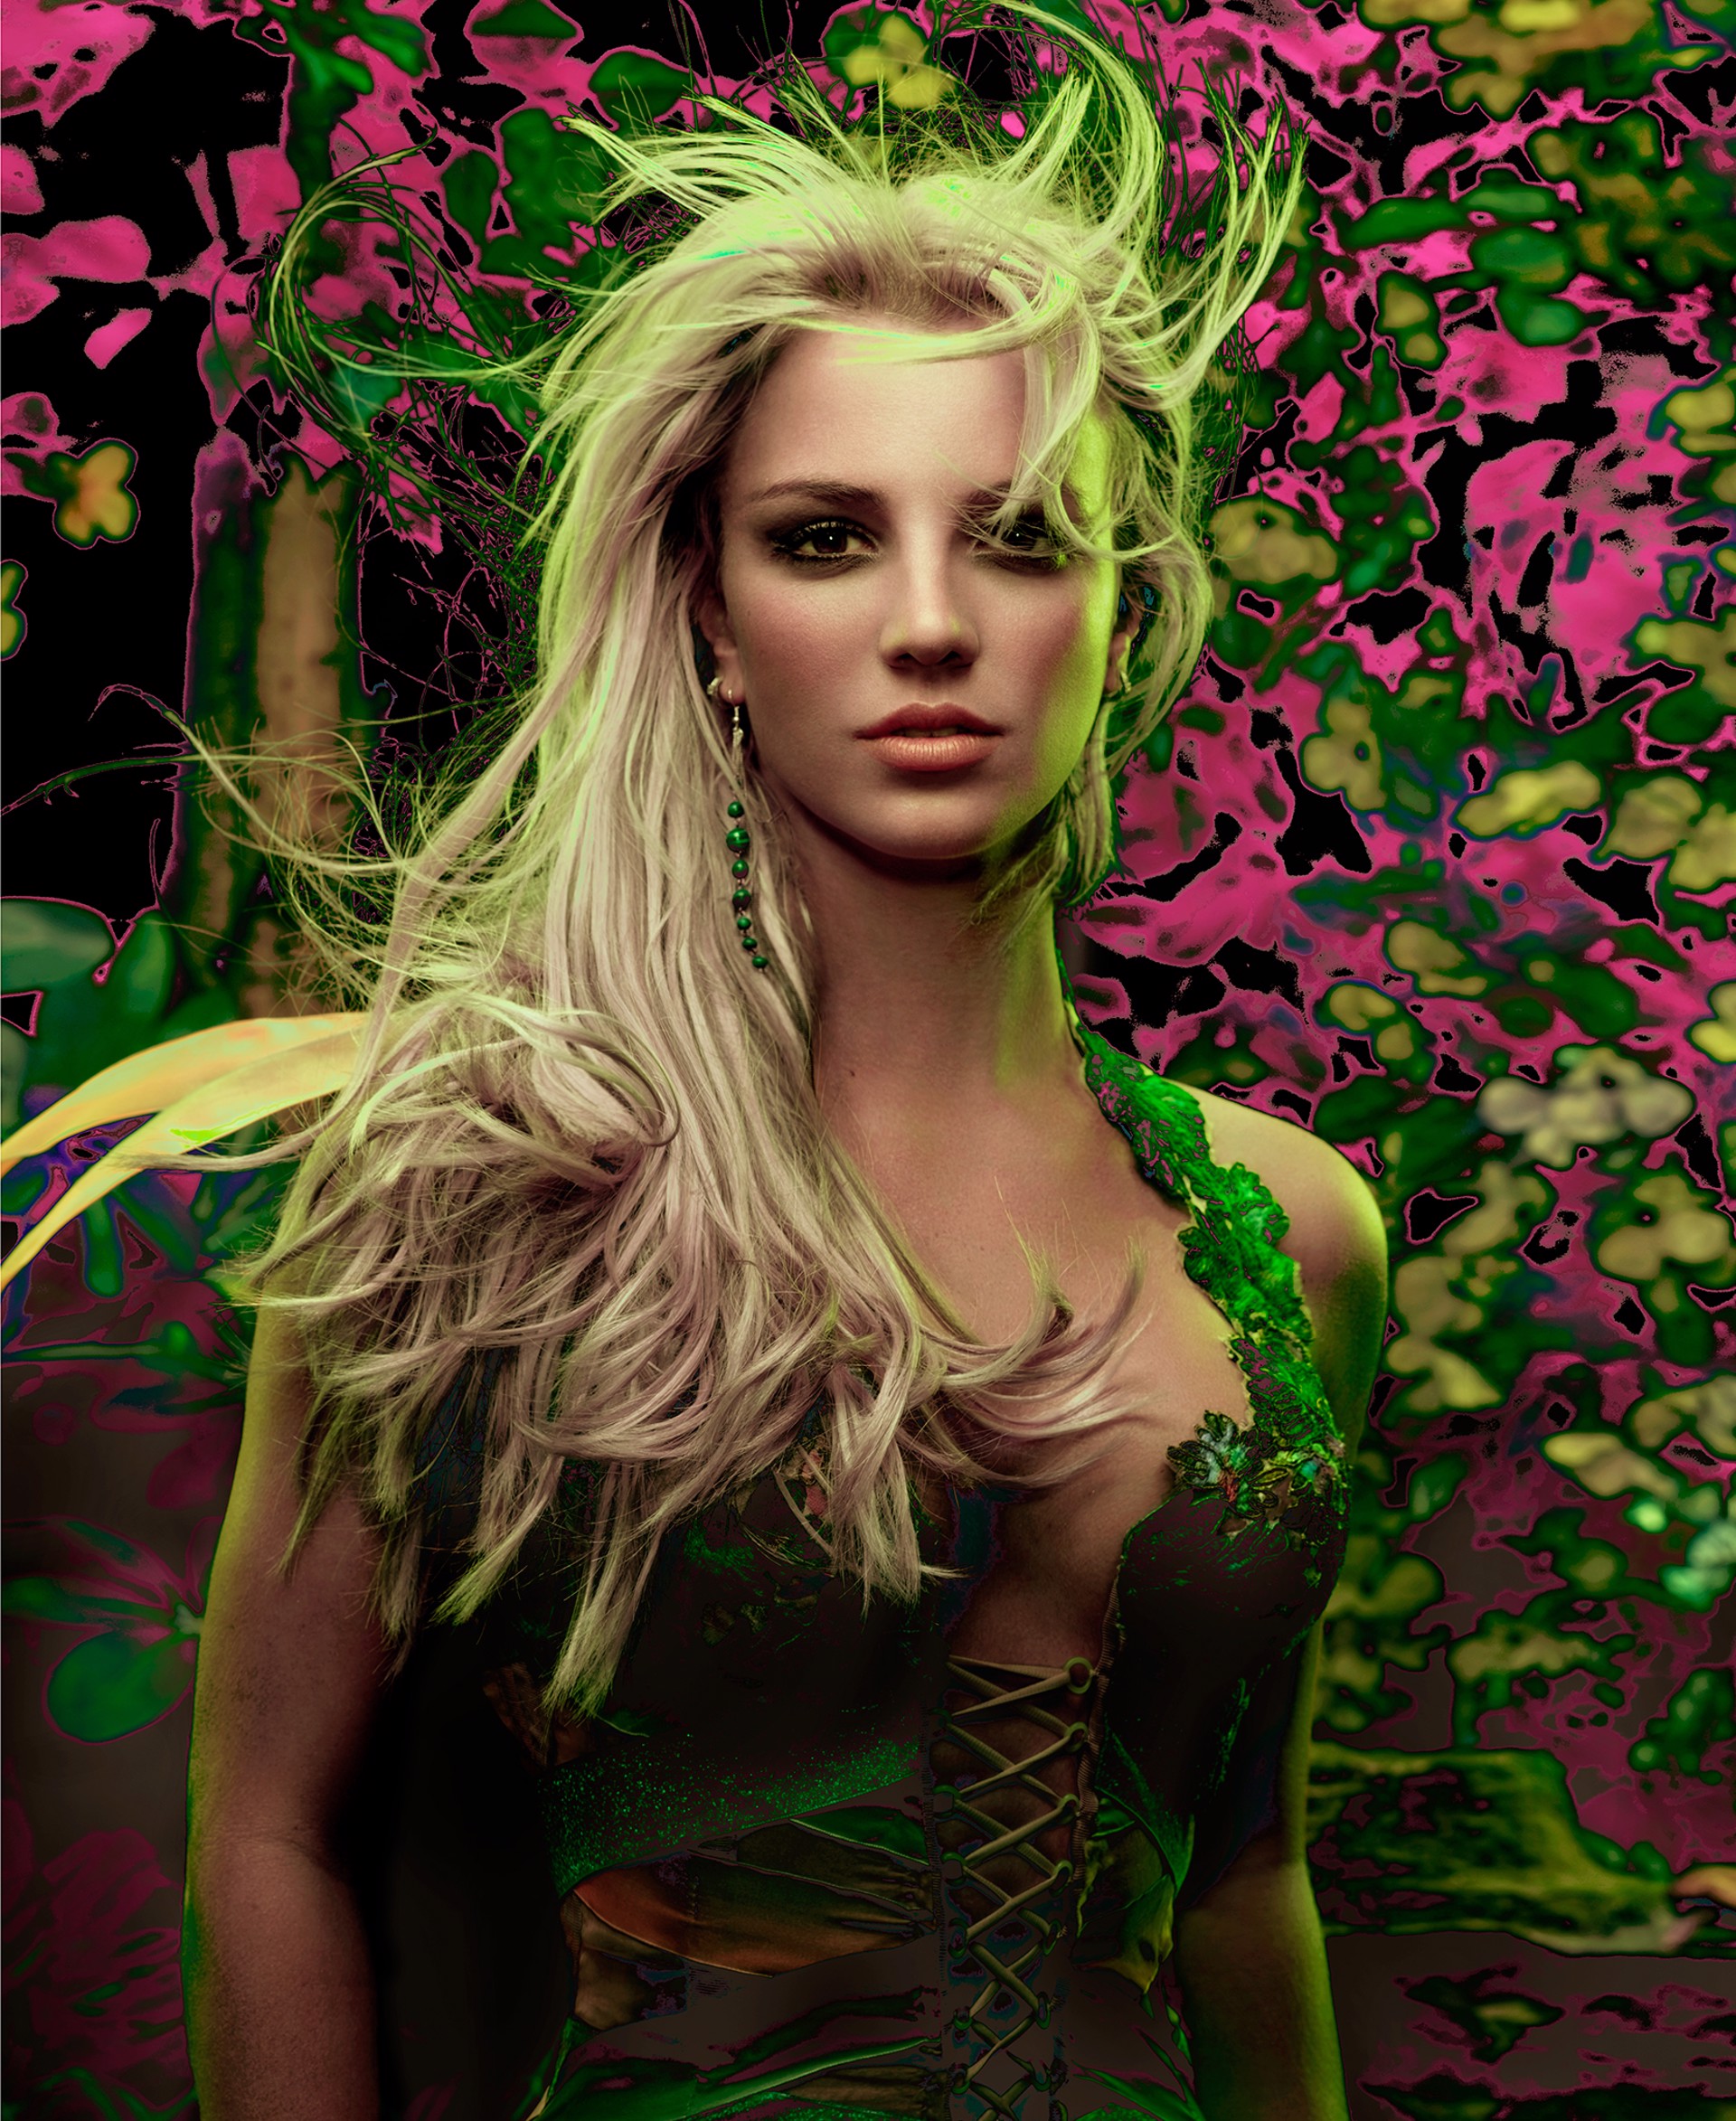 Britney, The Forest (other sizes available upon request) by Markus Klinko